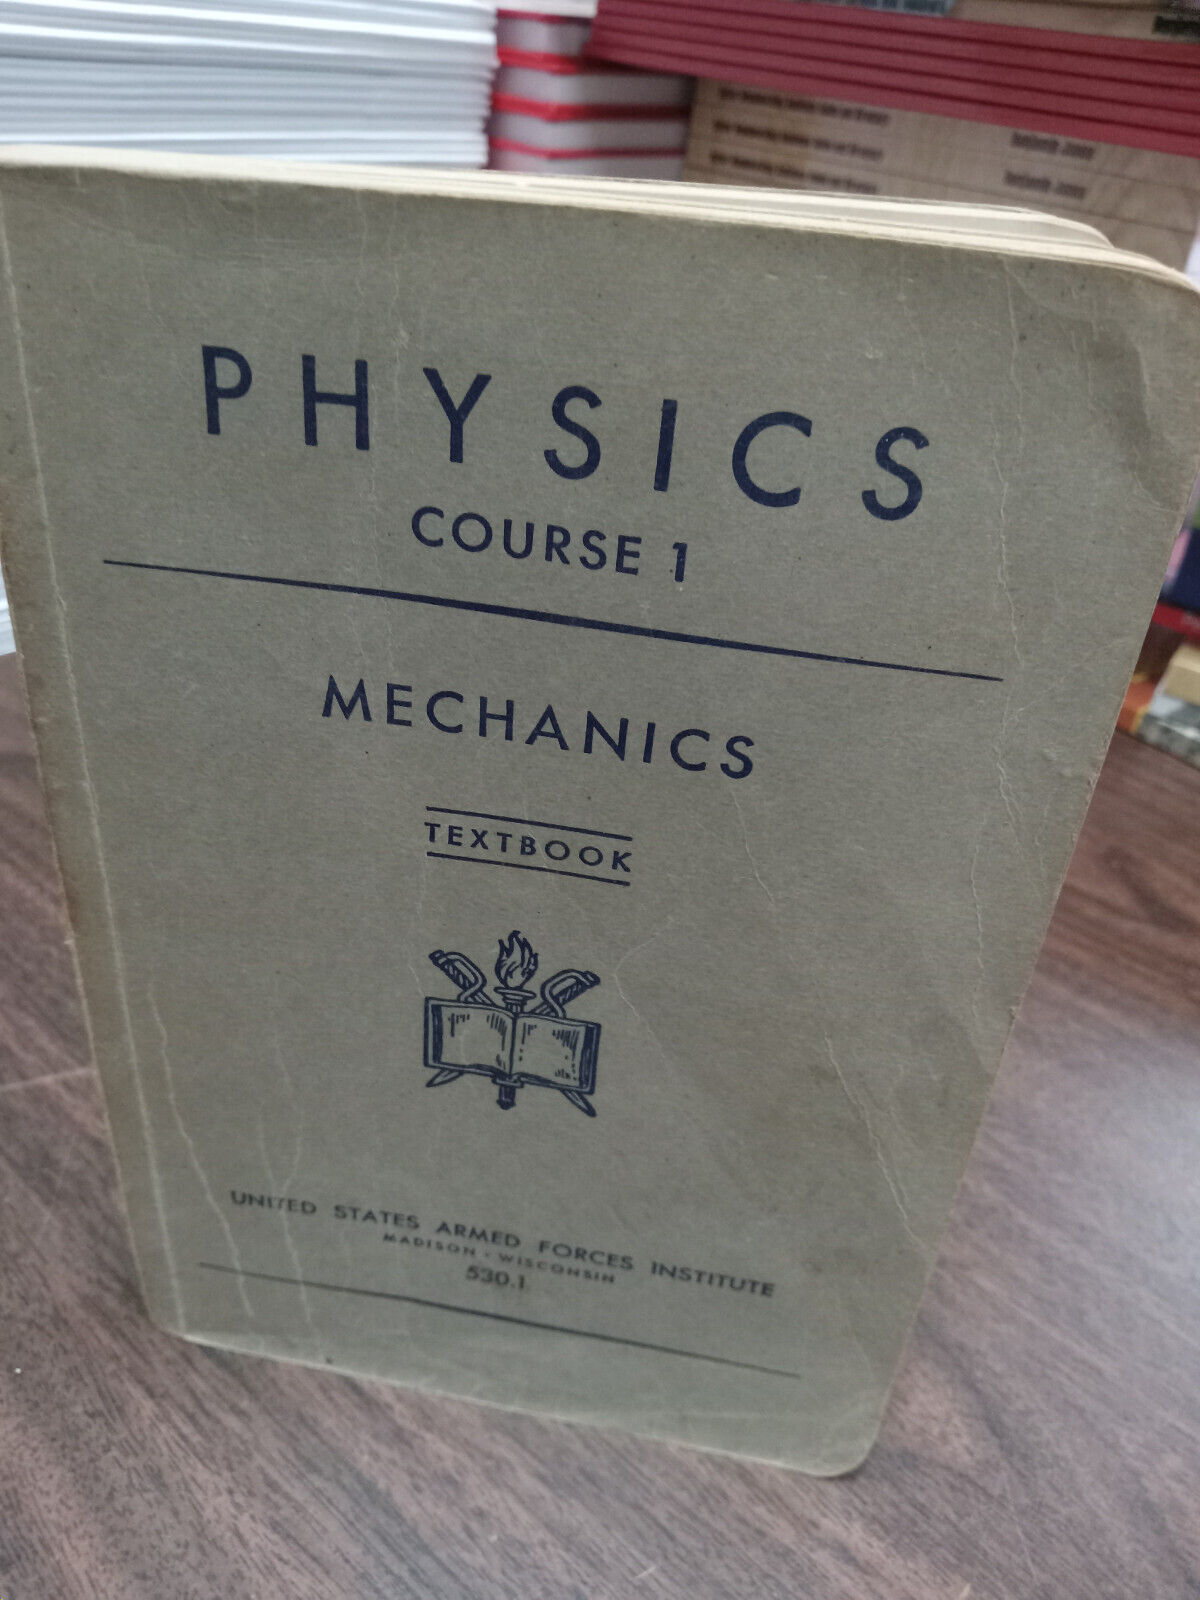 1943 WWII Physics Course 1 Textbook Mechanics US Armed Forces Institute 530.1